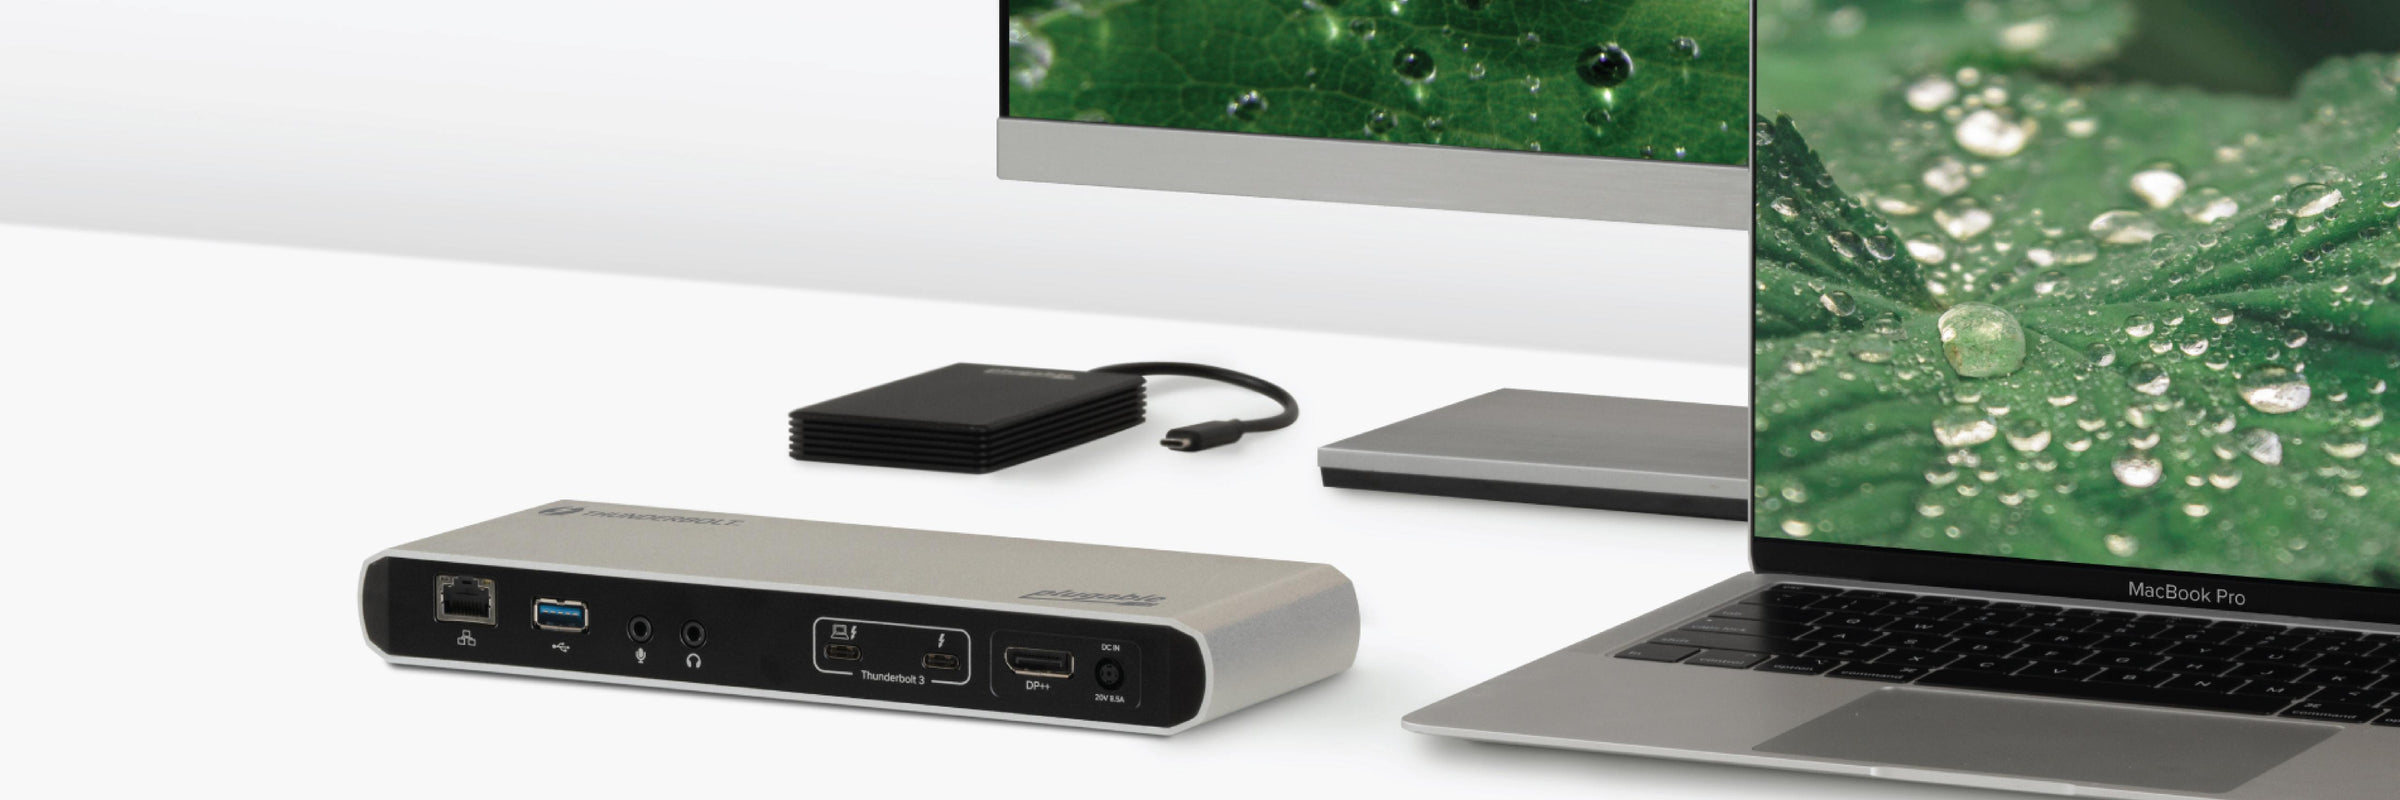 Plugable docking station and external SSD next to a laptop